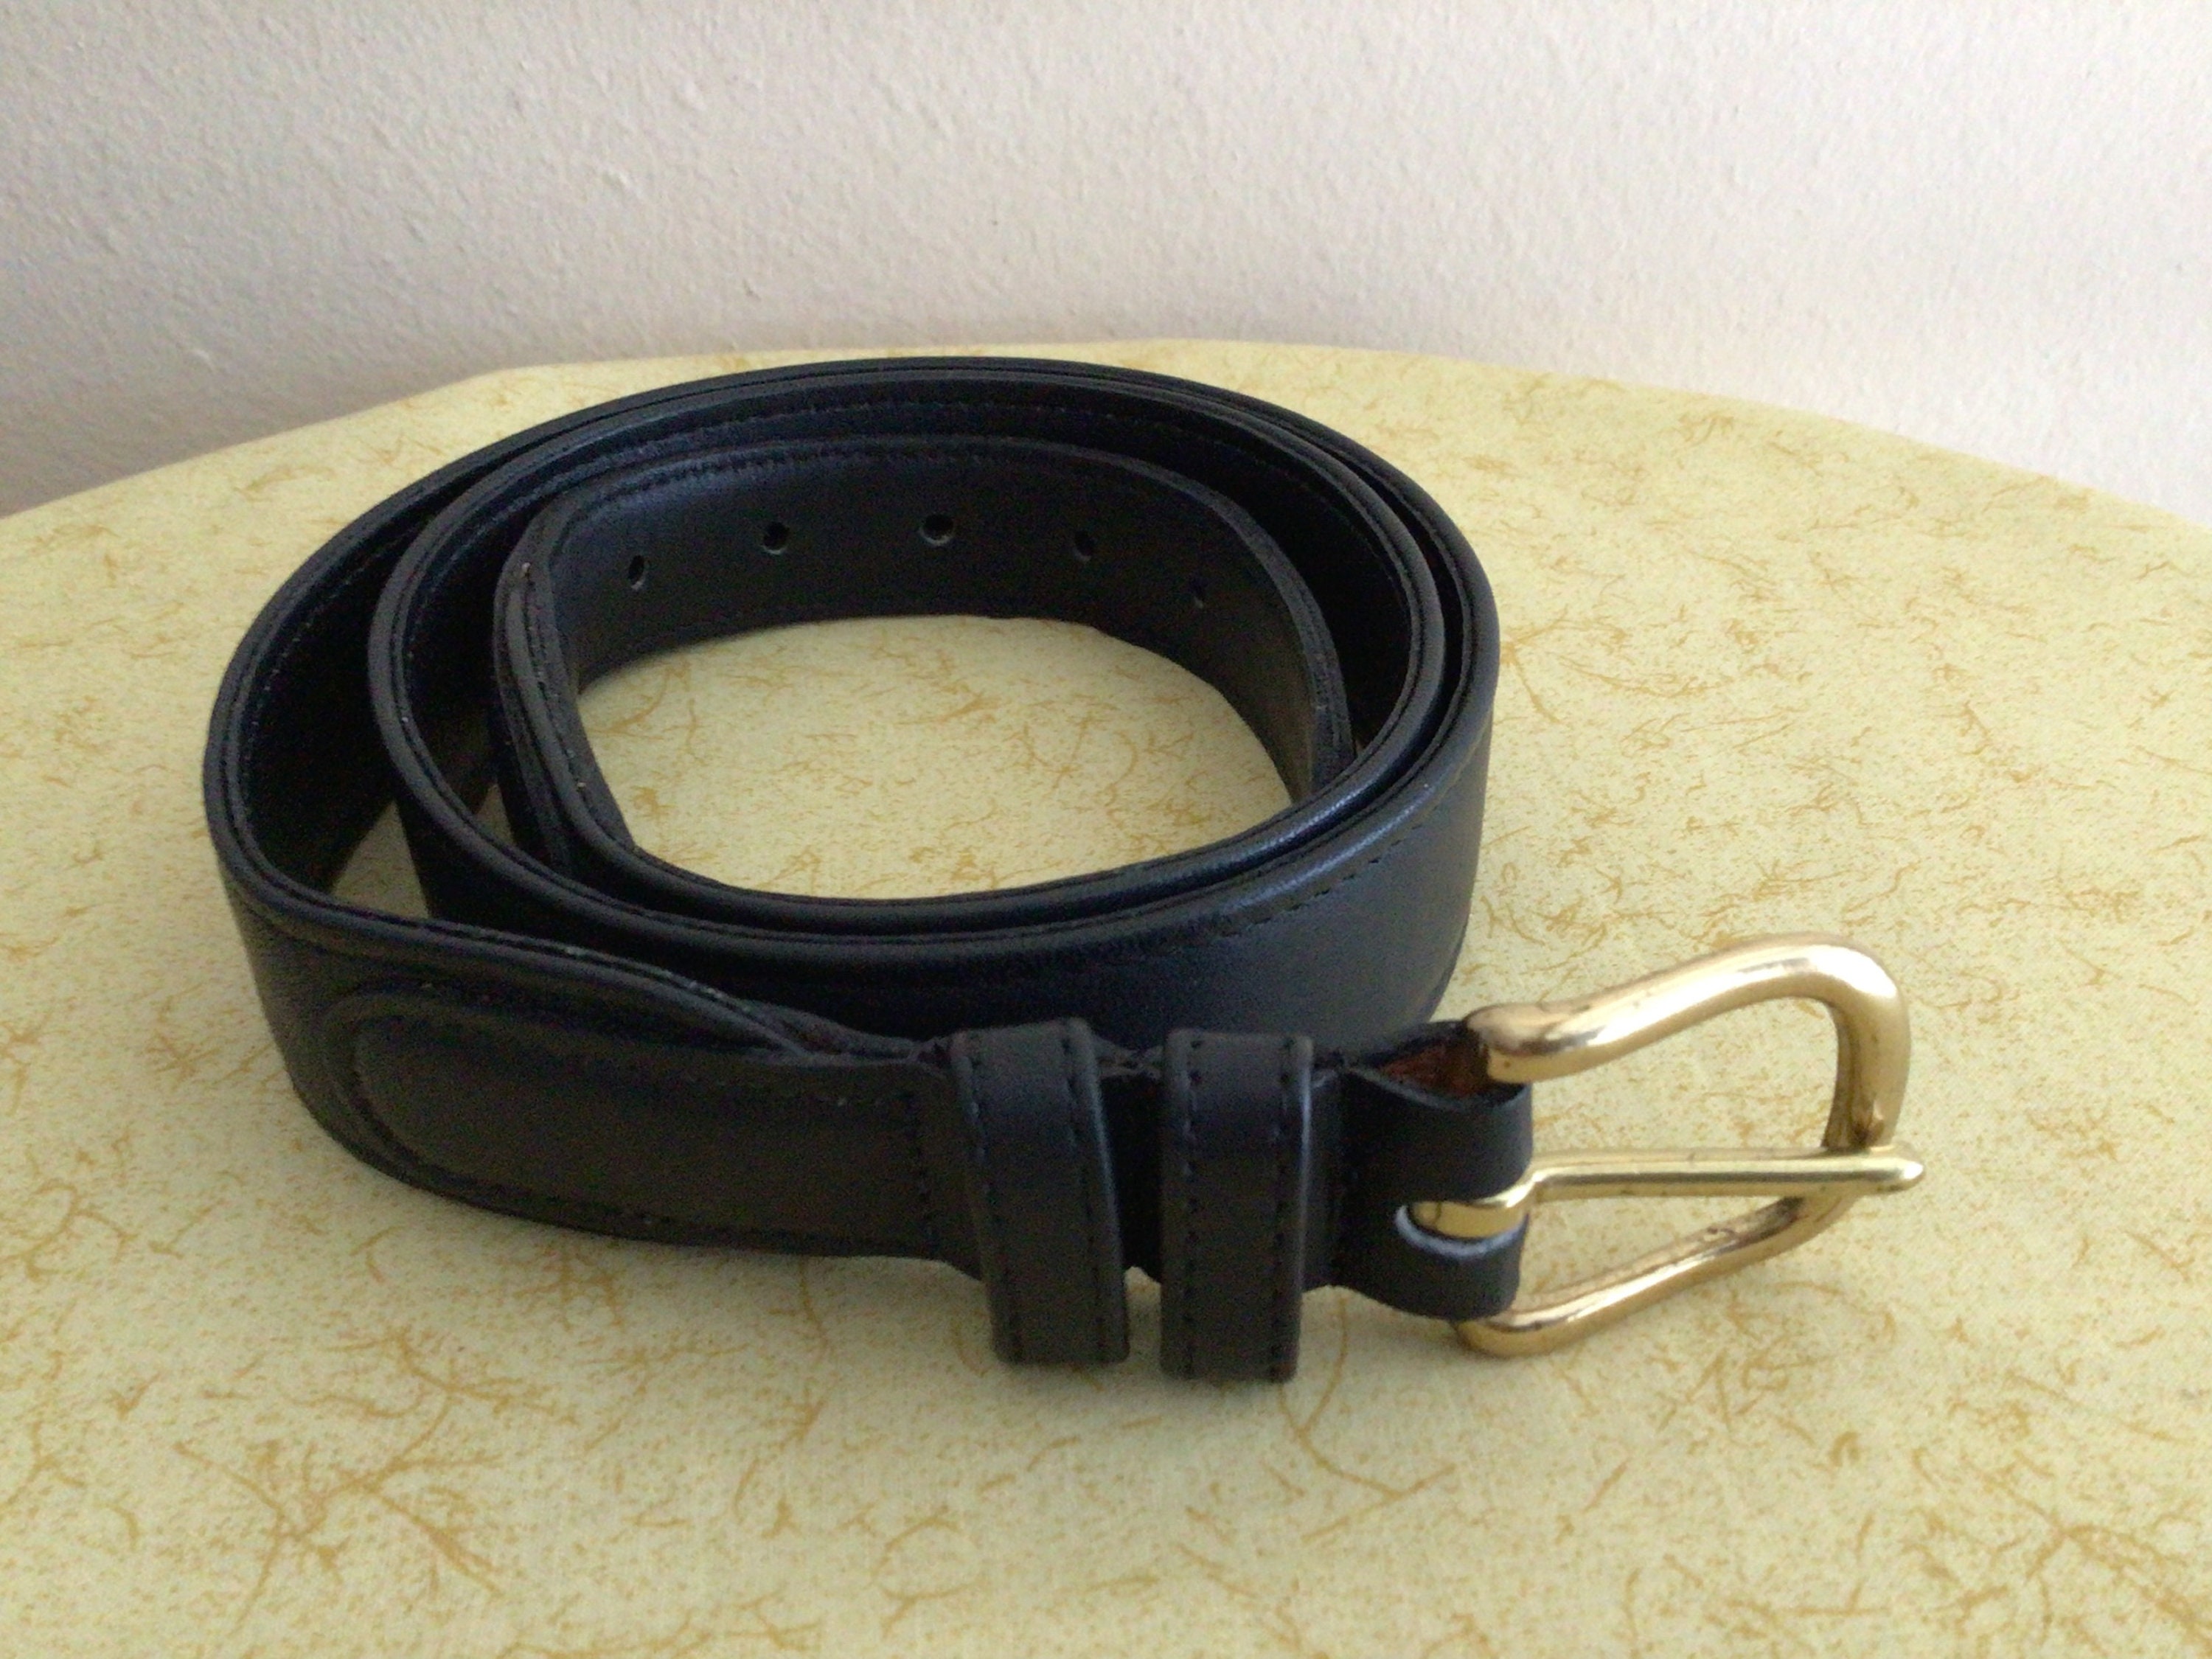 Coach Mens Belt Brass Buckle Black Braided Leather 5922 Size 38 in